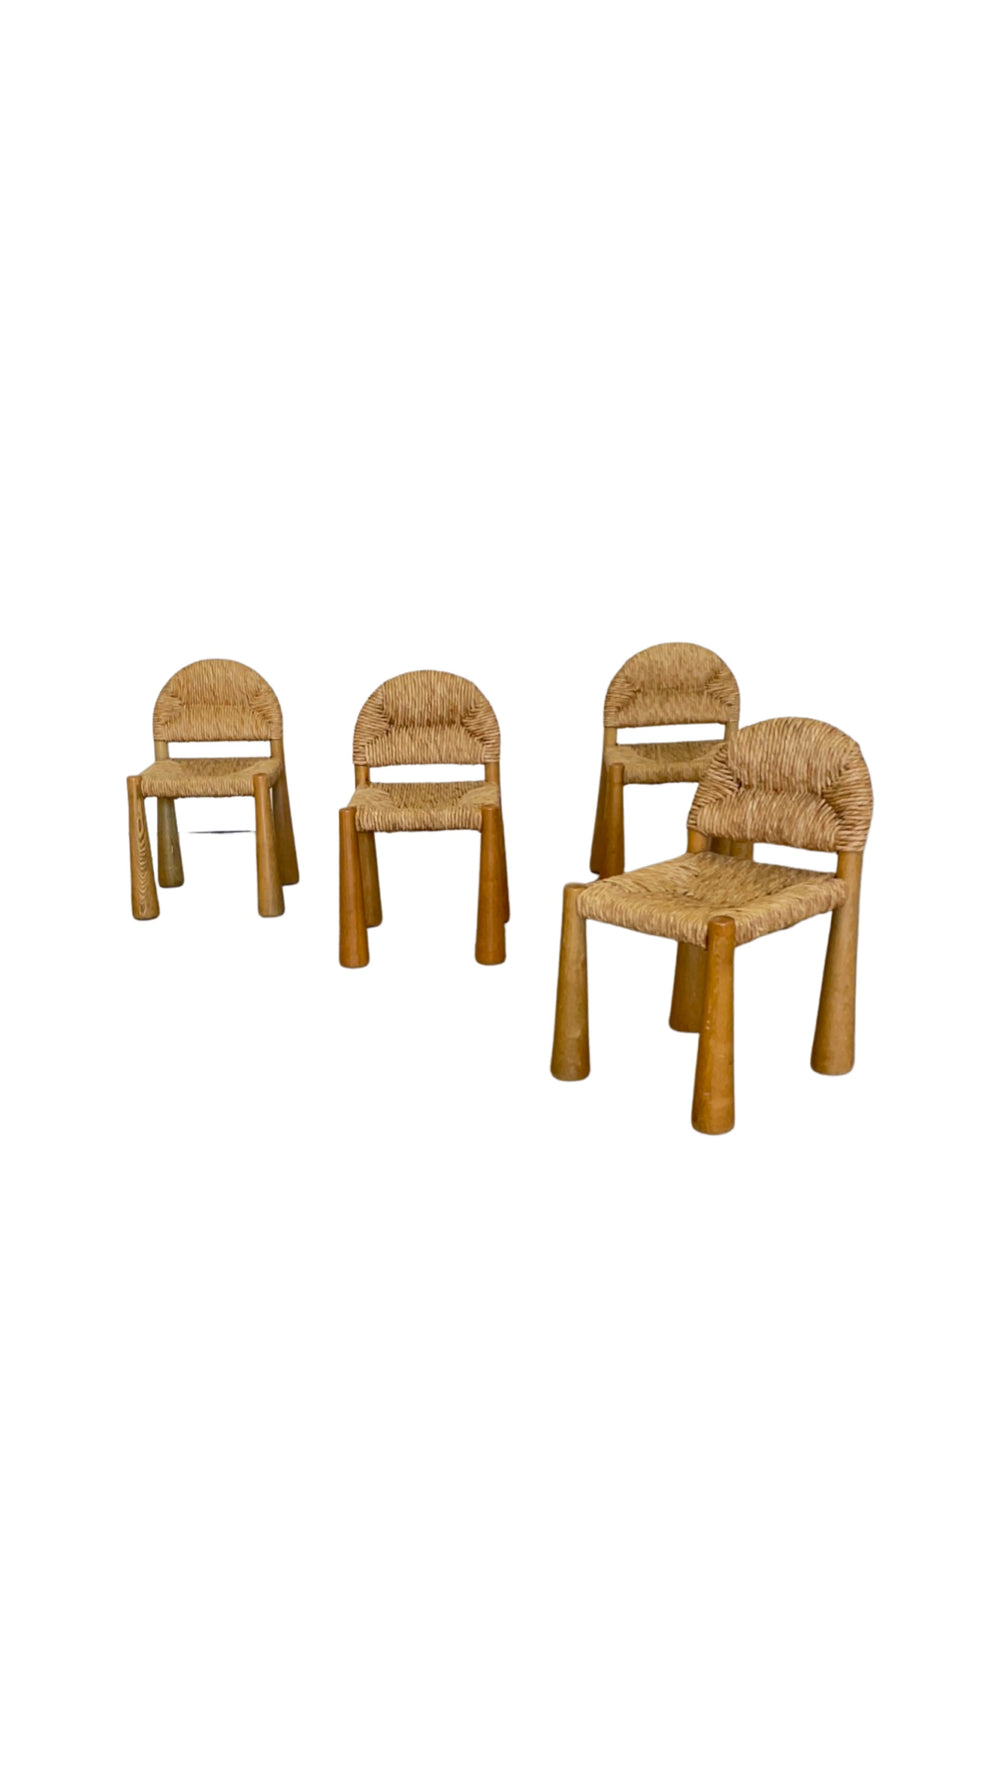 Alessandro Becchi rare matched set of four solid pine "Toscanolla" dining chairs by for Giovanetti, Italy, 1970s